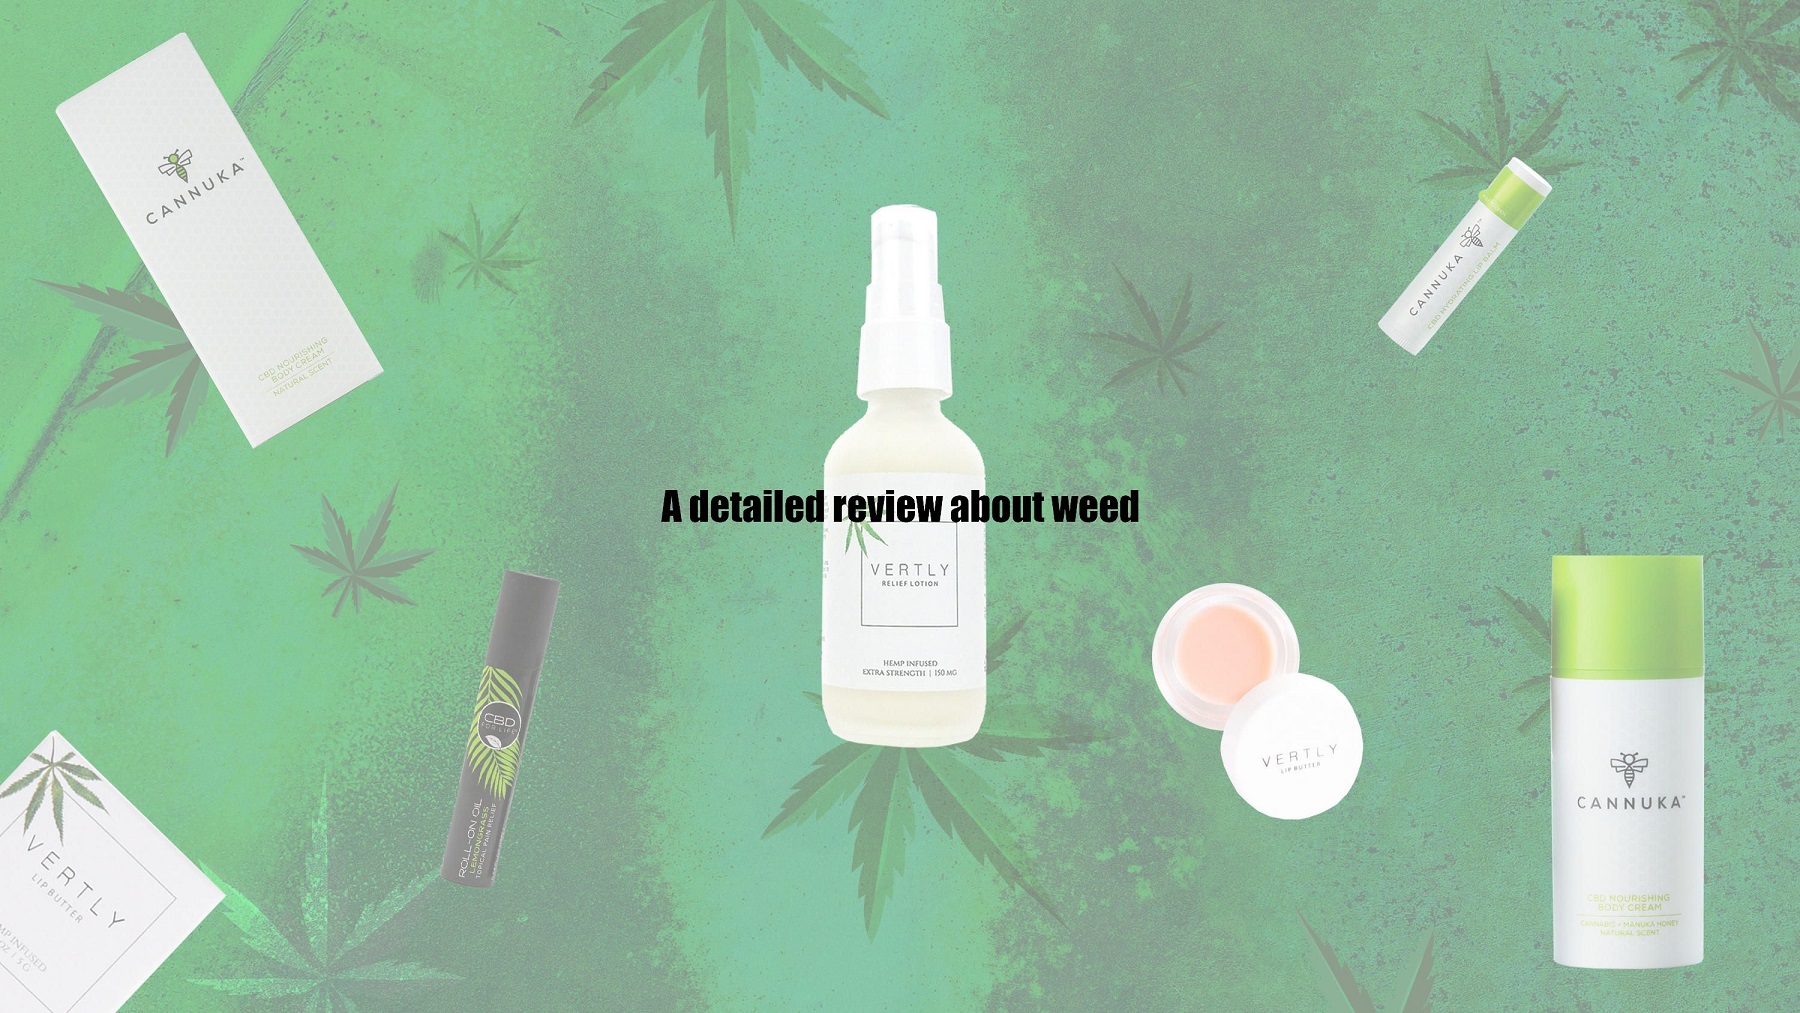 A detailed review about weed